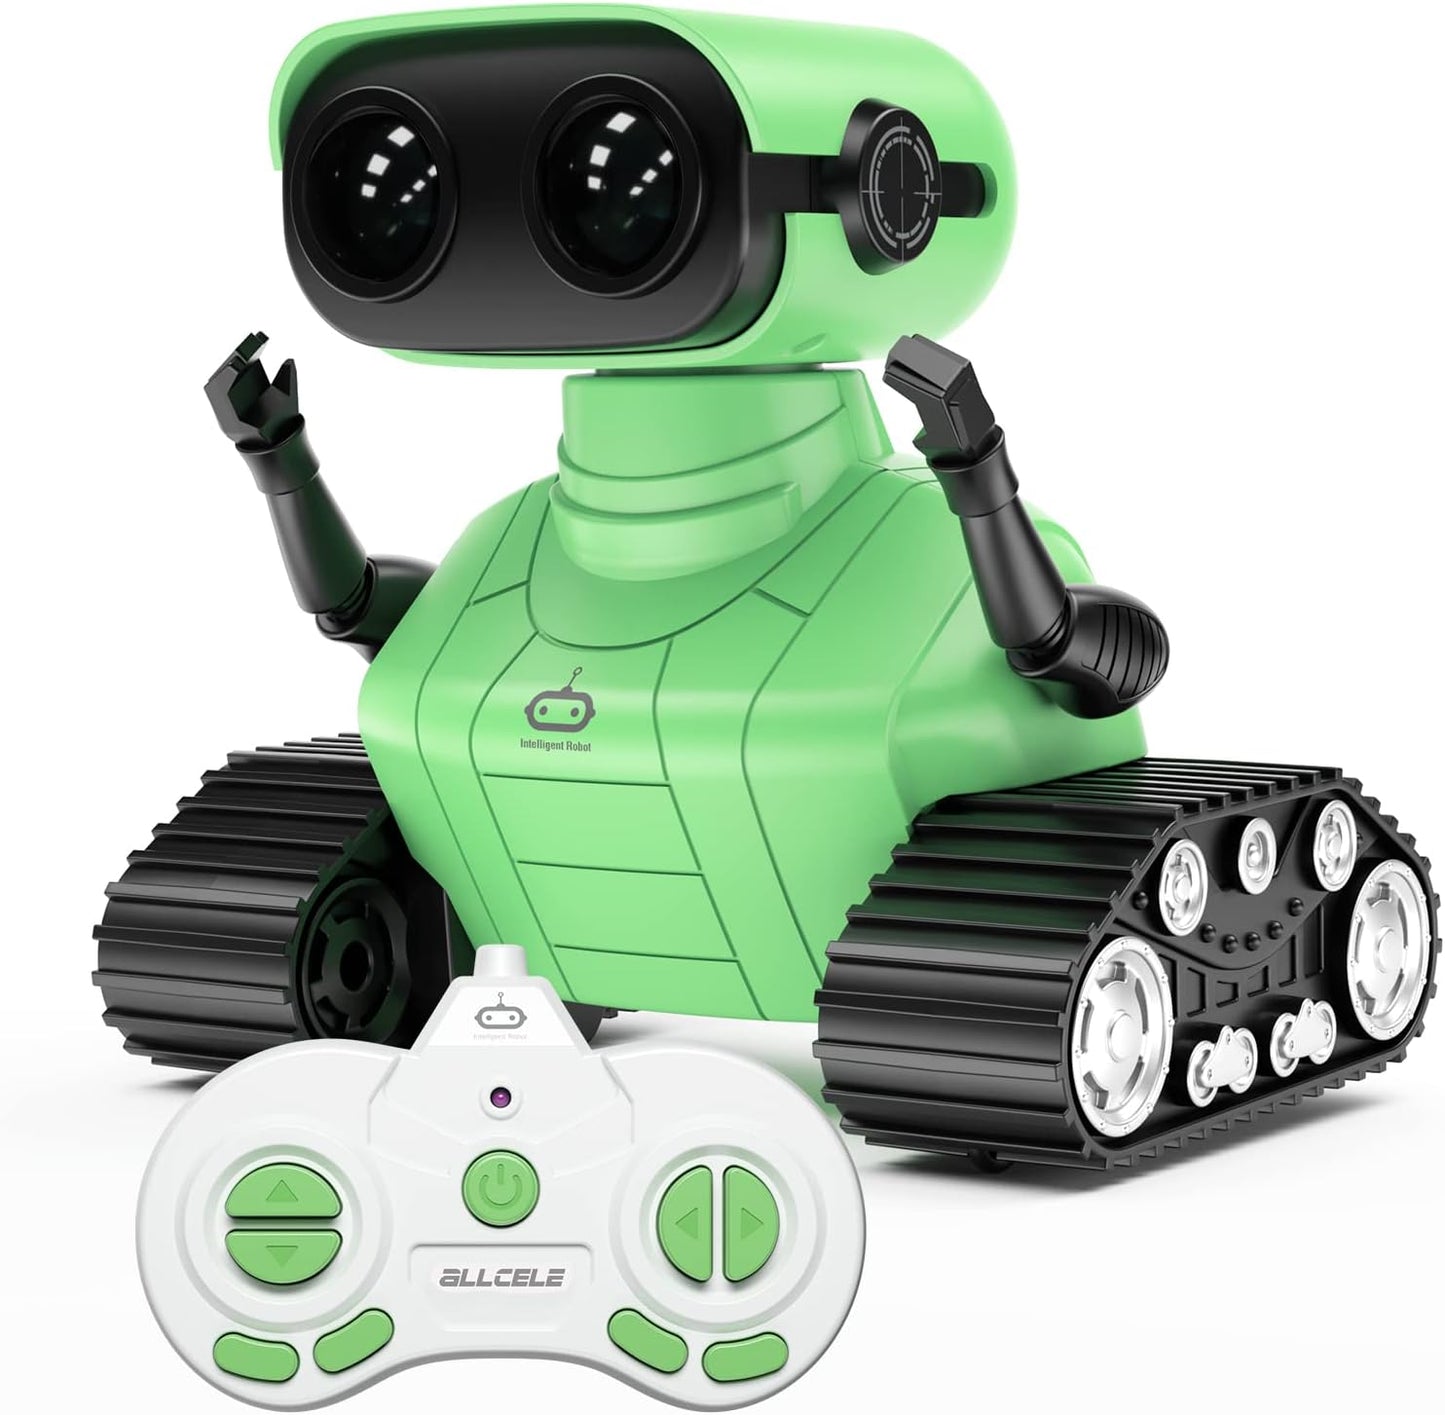 ALLCELE Robot Toys, Rechargeable RC Robots for Kids Boys, Remote Control Toy with Music and LED Eyes, Gift for Children Age 3 Years and Up - Yellow